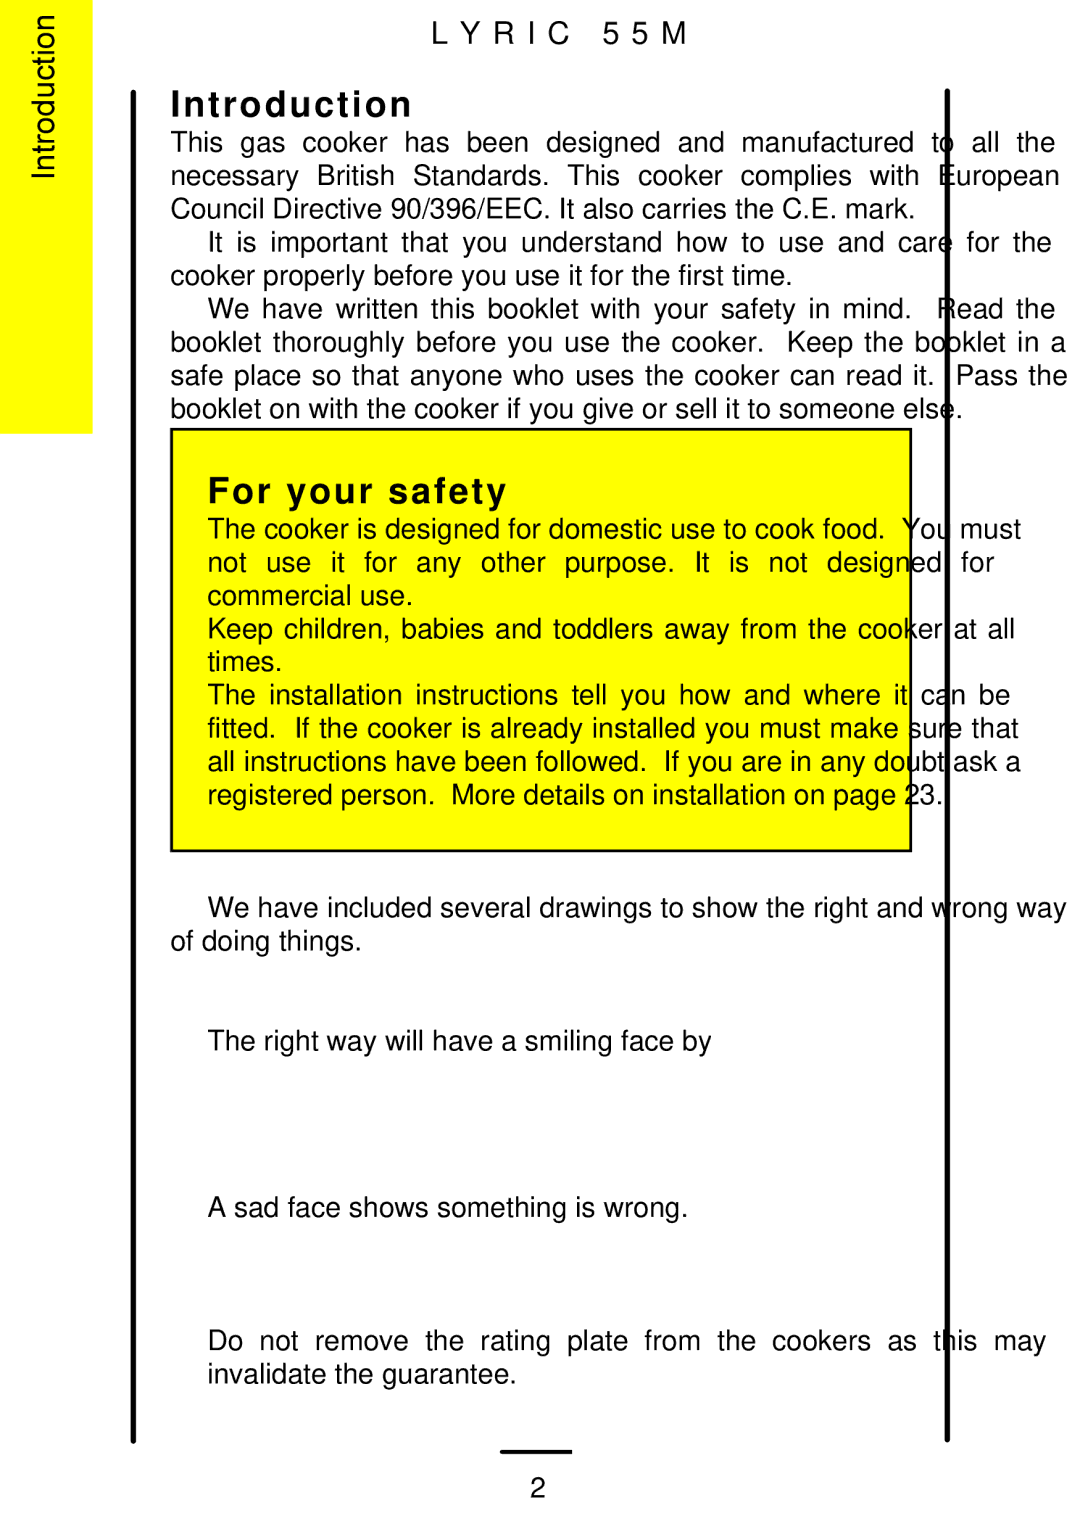 Parkinson Cowan 55M installation instructions Introduction, For your safety, R I C 5 5 M 